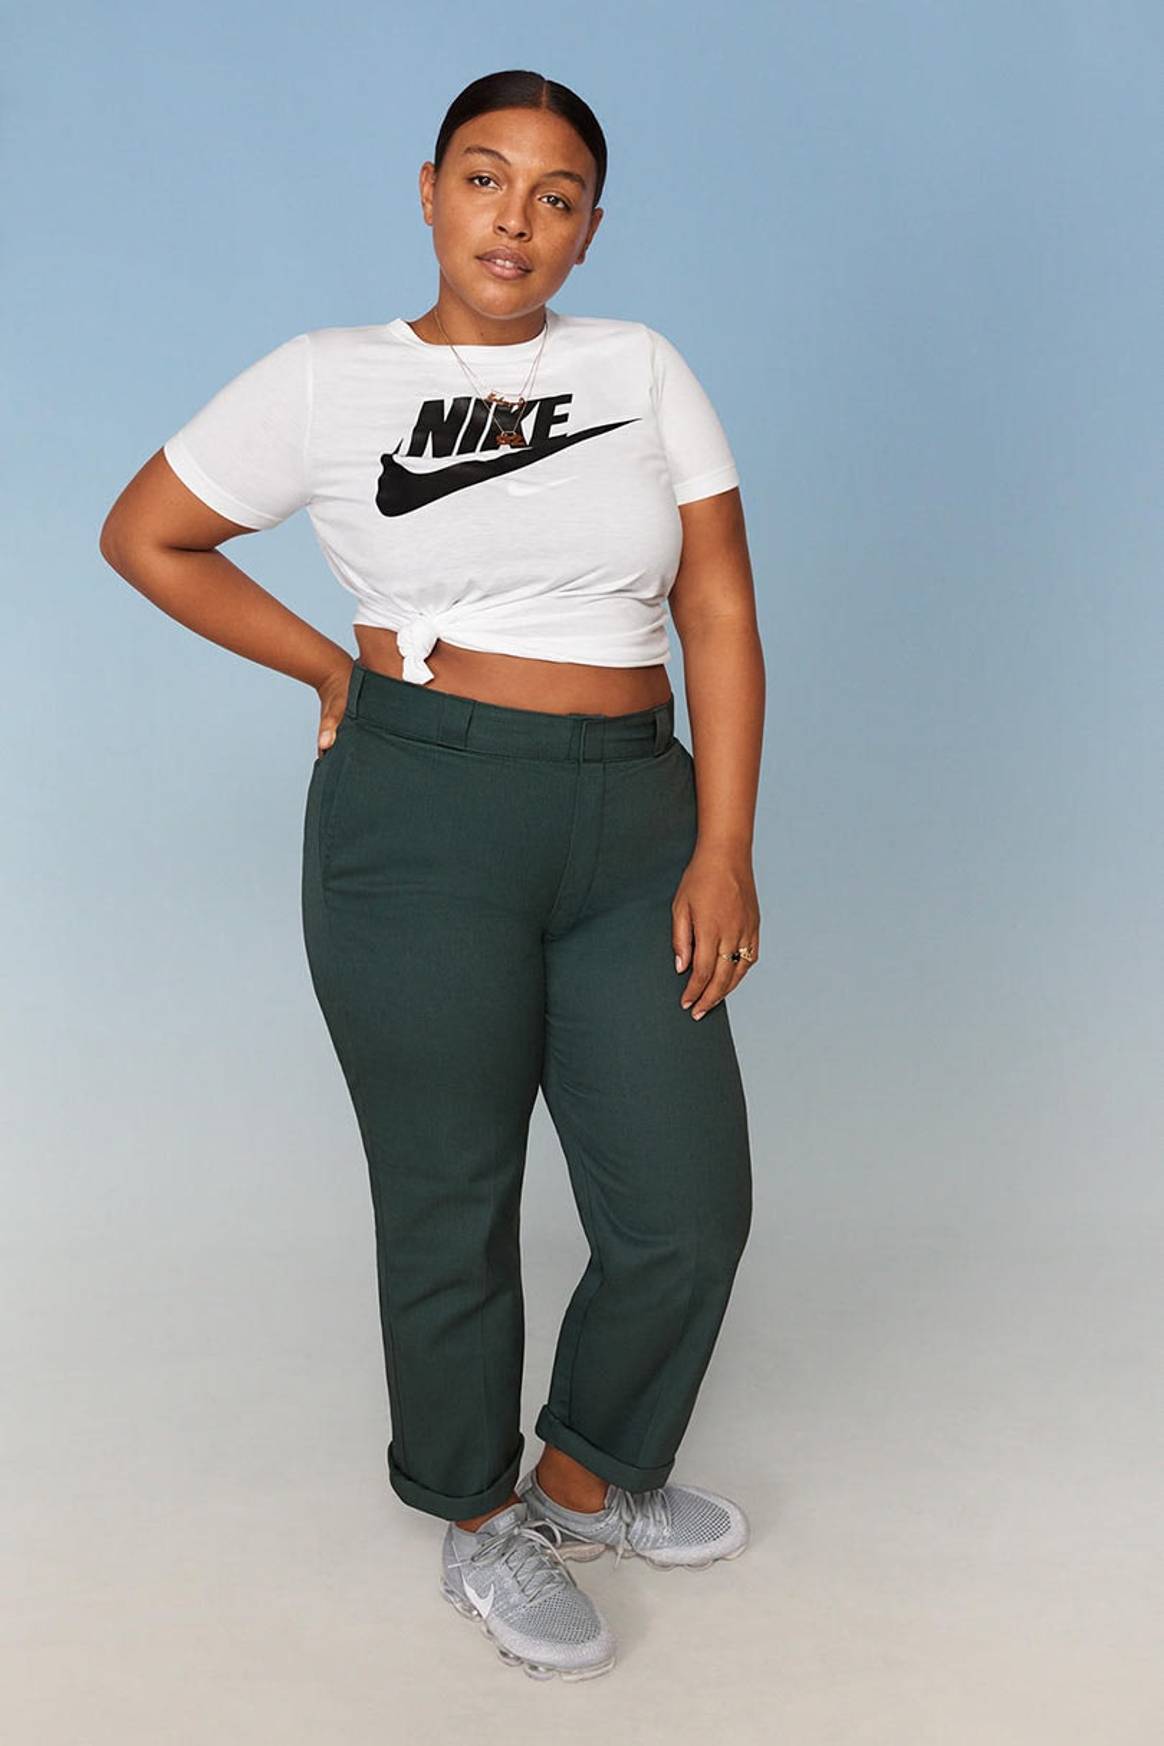 In Pictures: Nike's first plus-size range